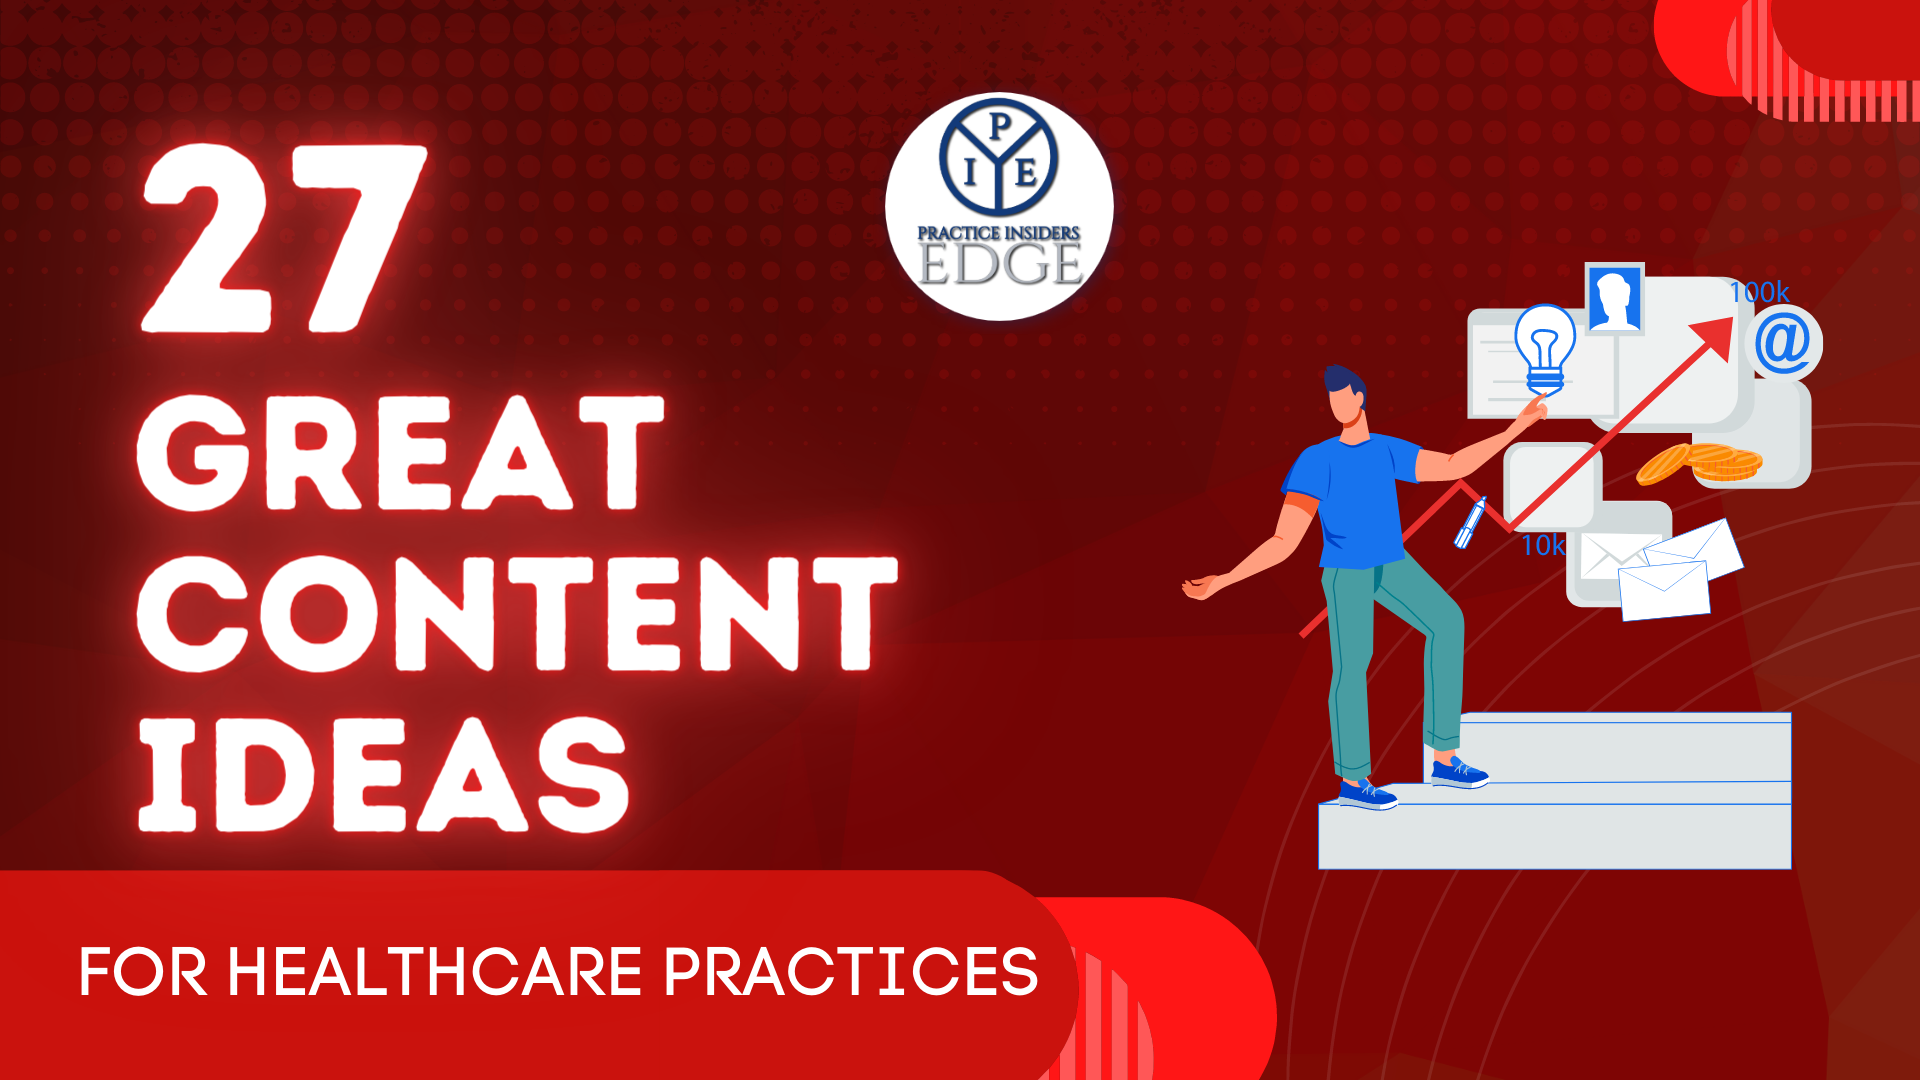 27 Awesome Content Ideas for Healthcare Practices